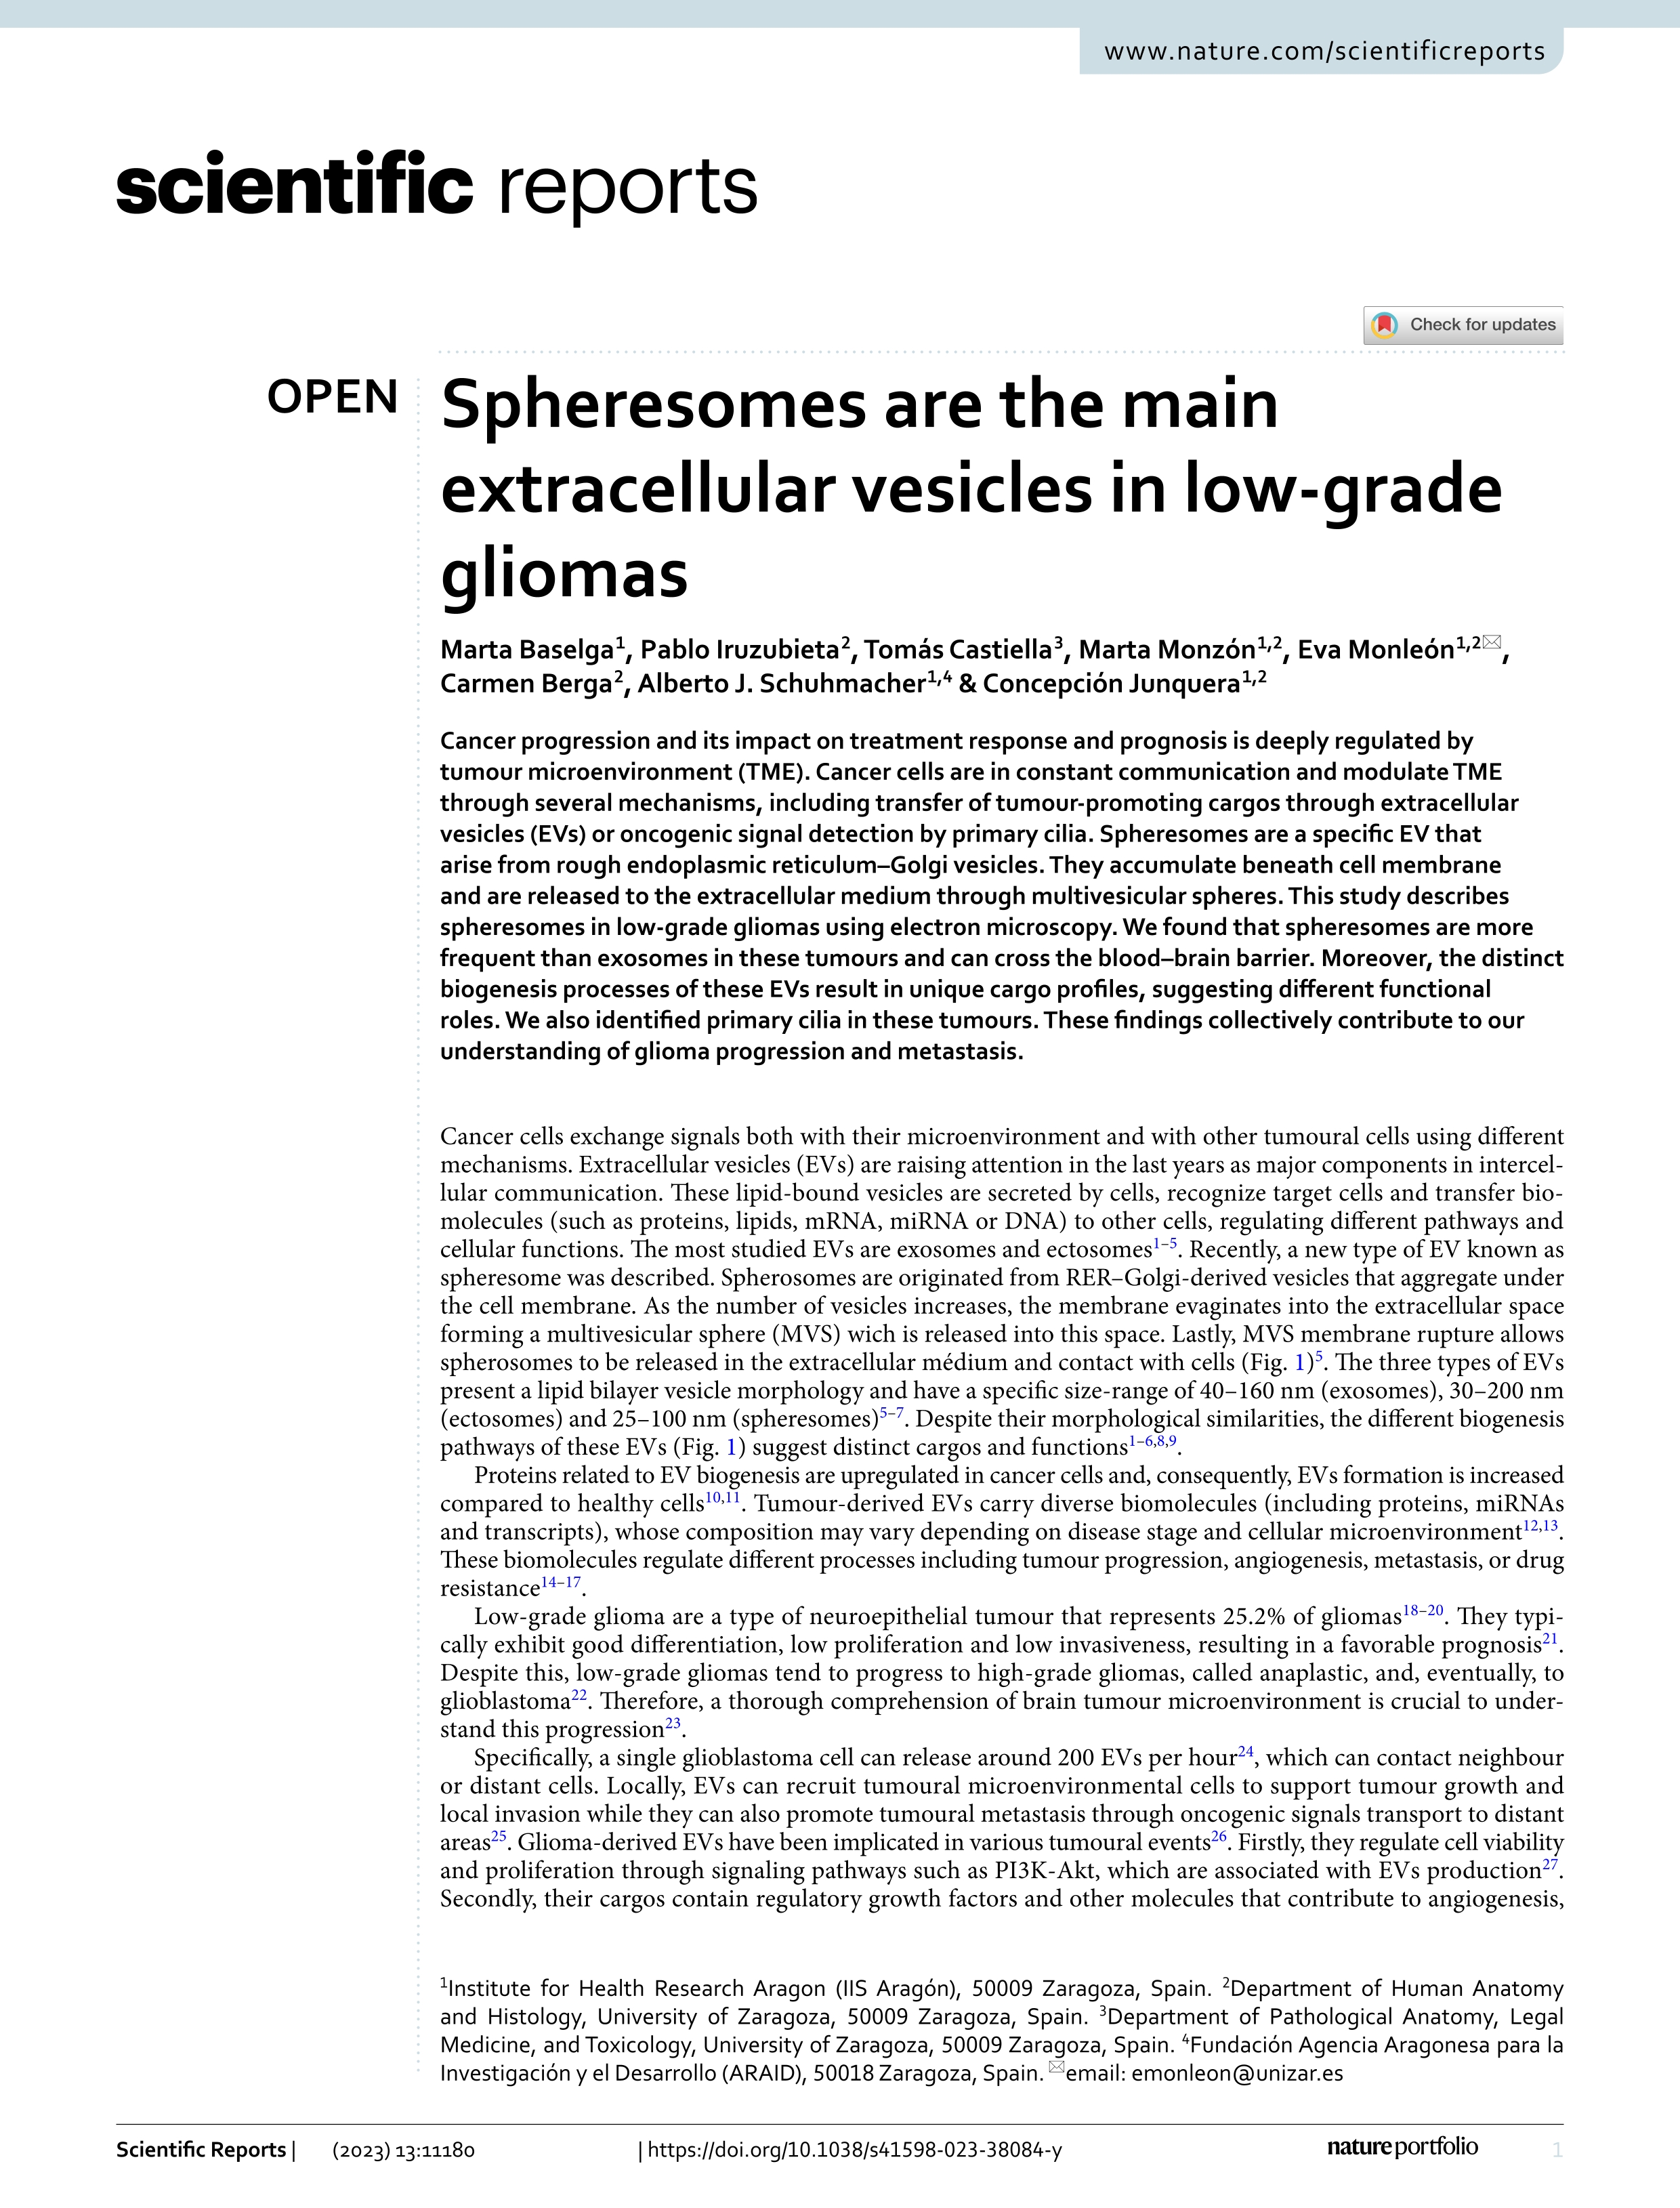 Spheresomes are the main extracellular vesicles in low-grade gliomas